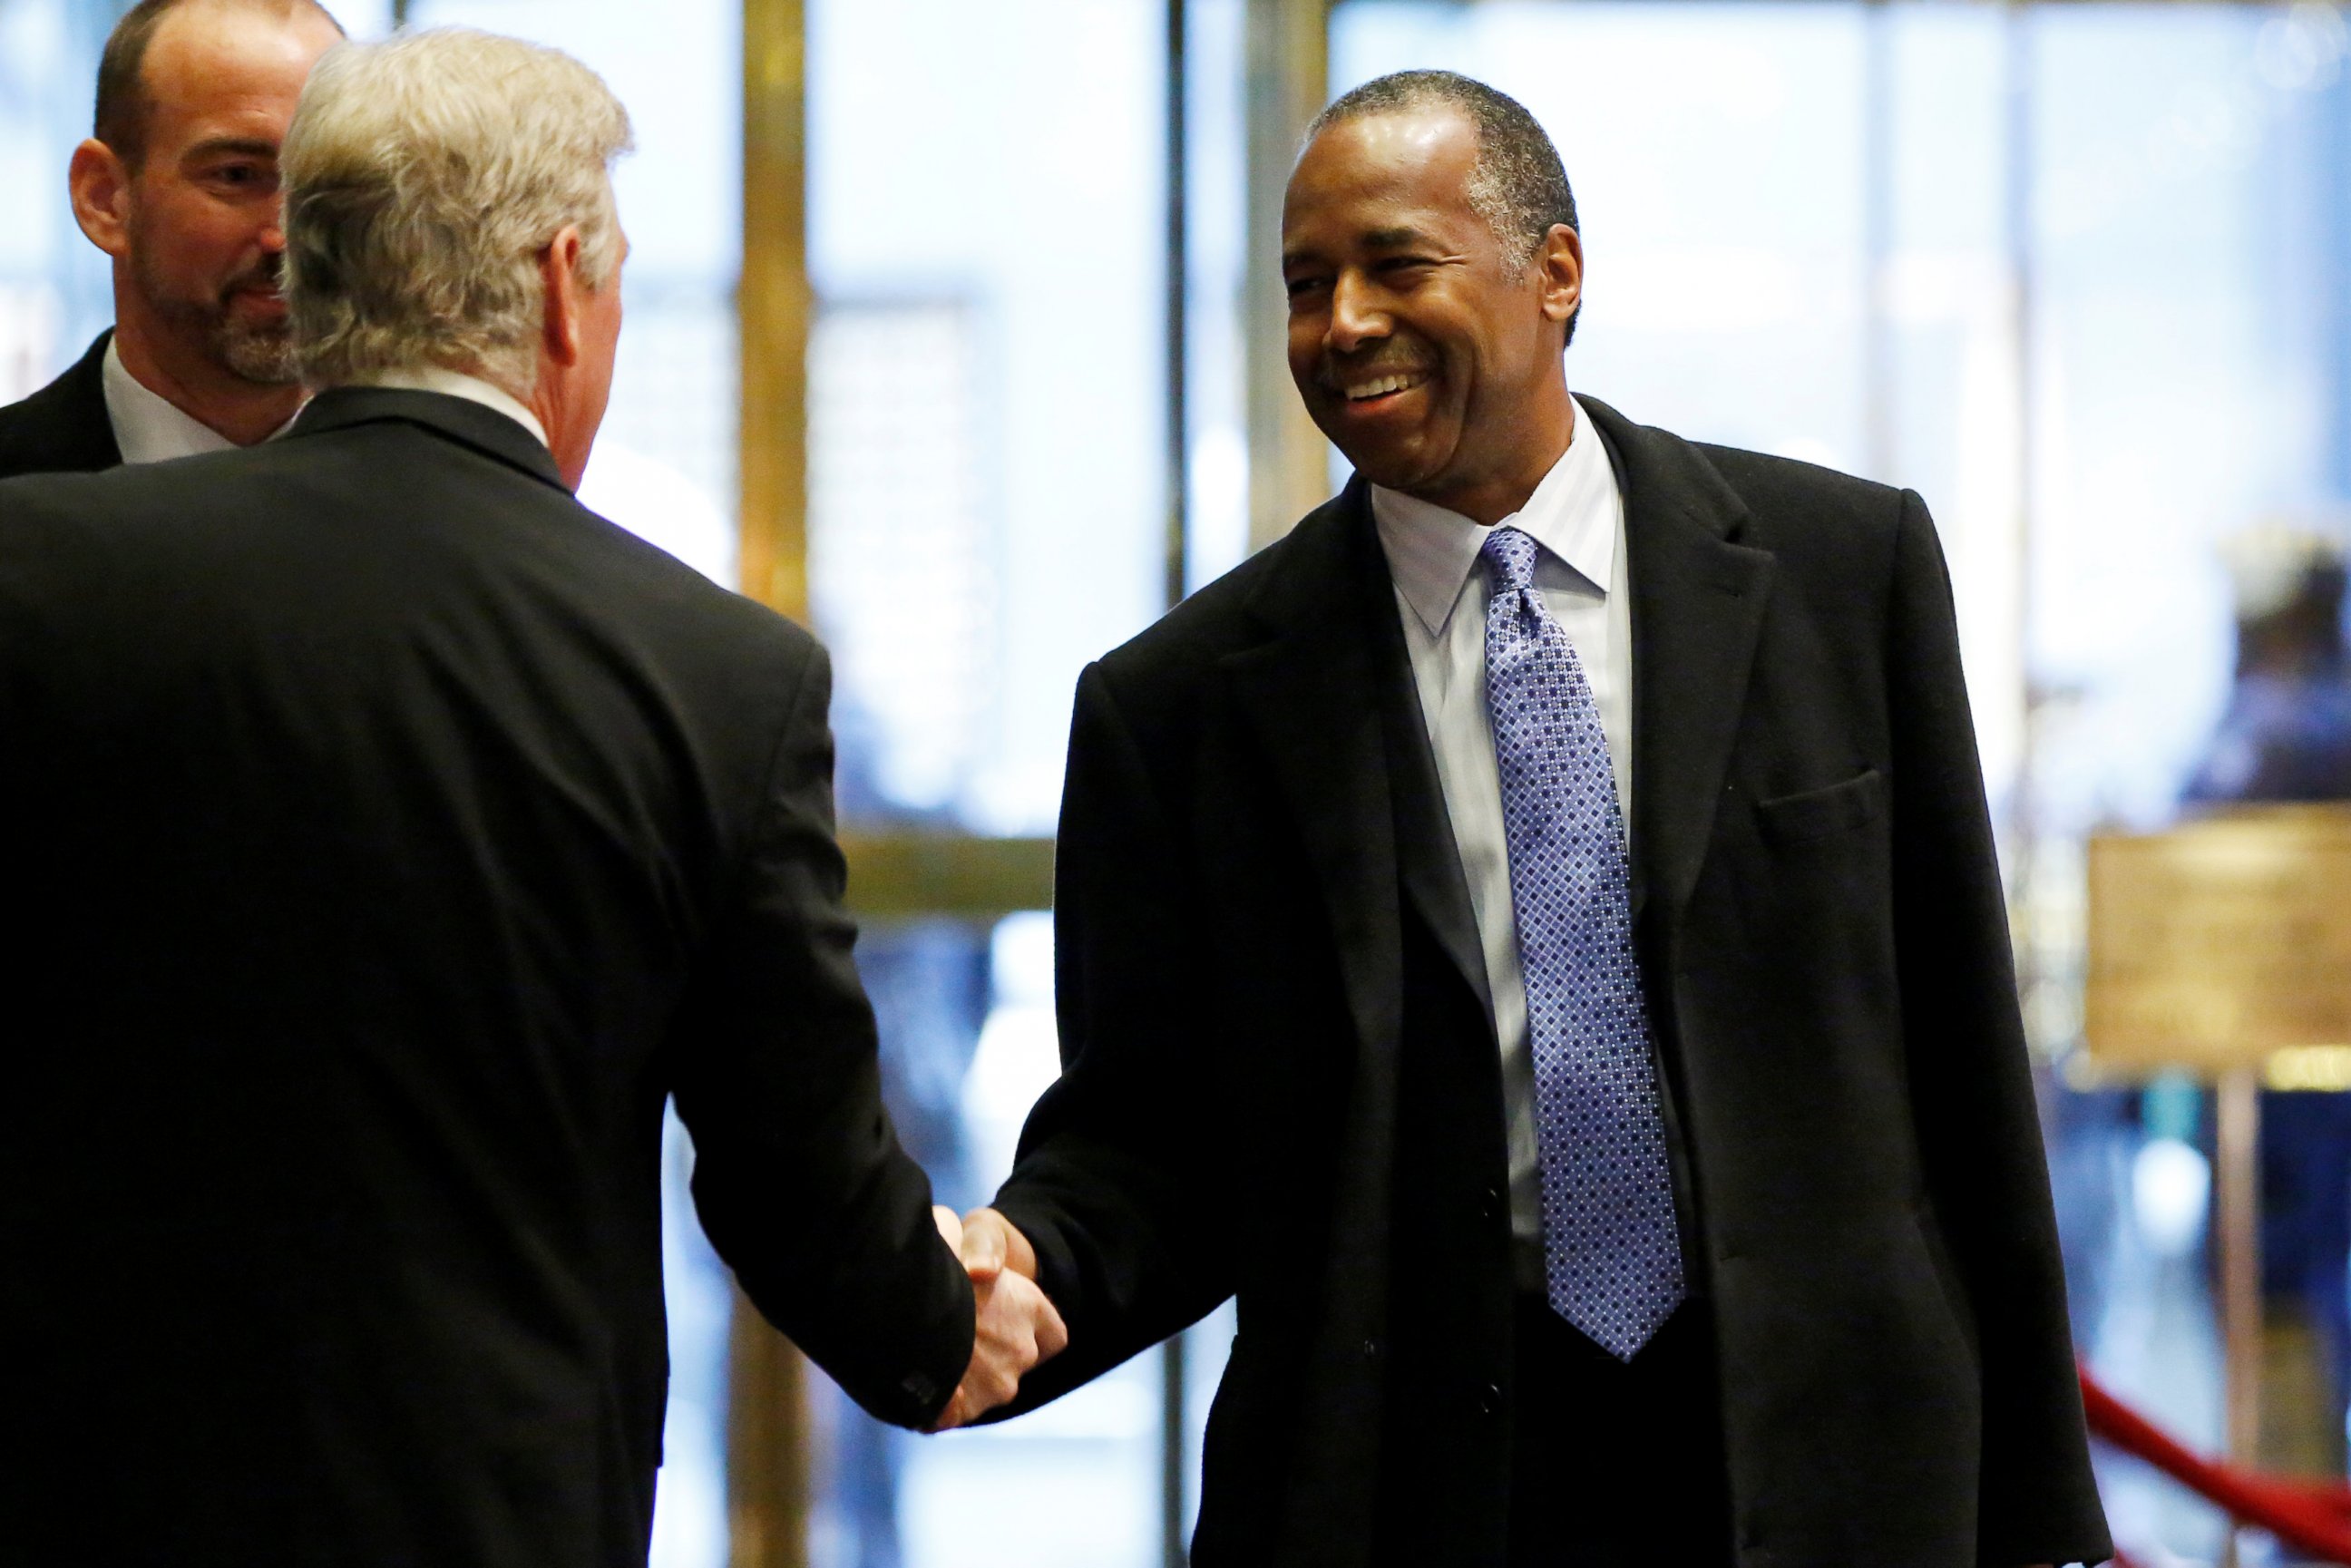 PHOTO: Ben Carson, President-elect Donald Trump's nominee to be secretary of housing and urban development, smiles as he enters the lobby of Trump Tower in New York, Dec. 12, 2016.